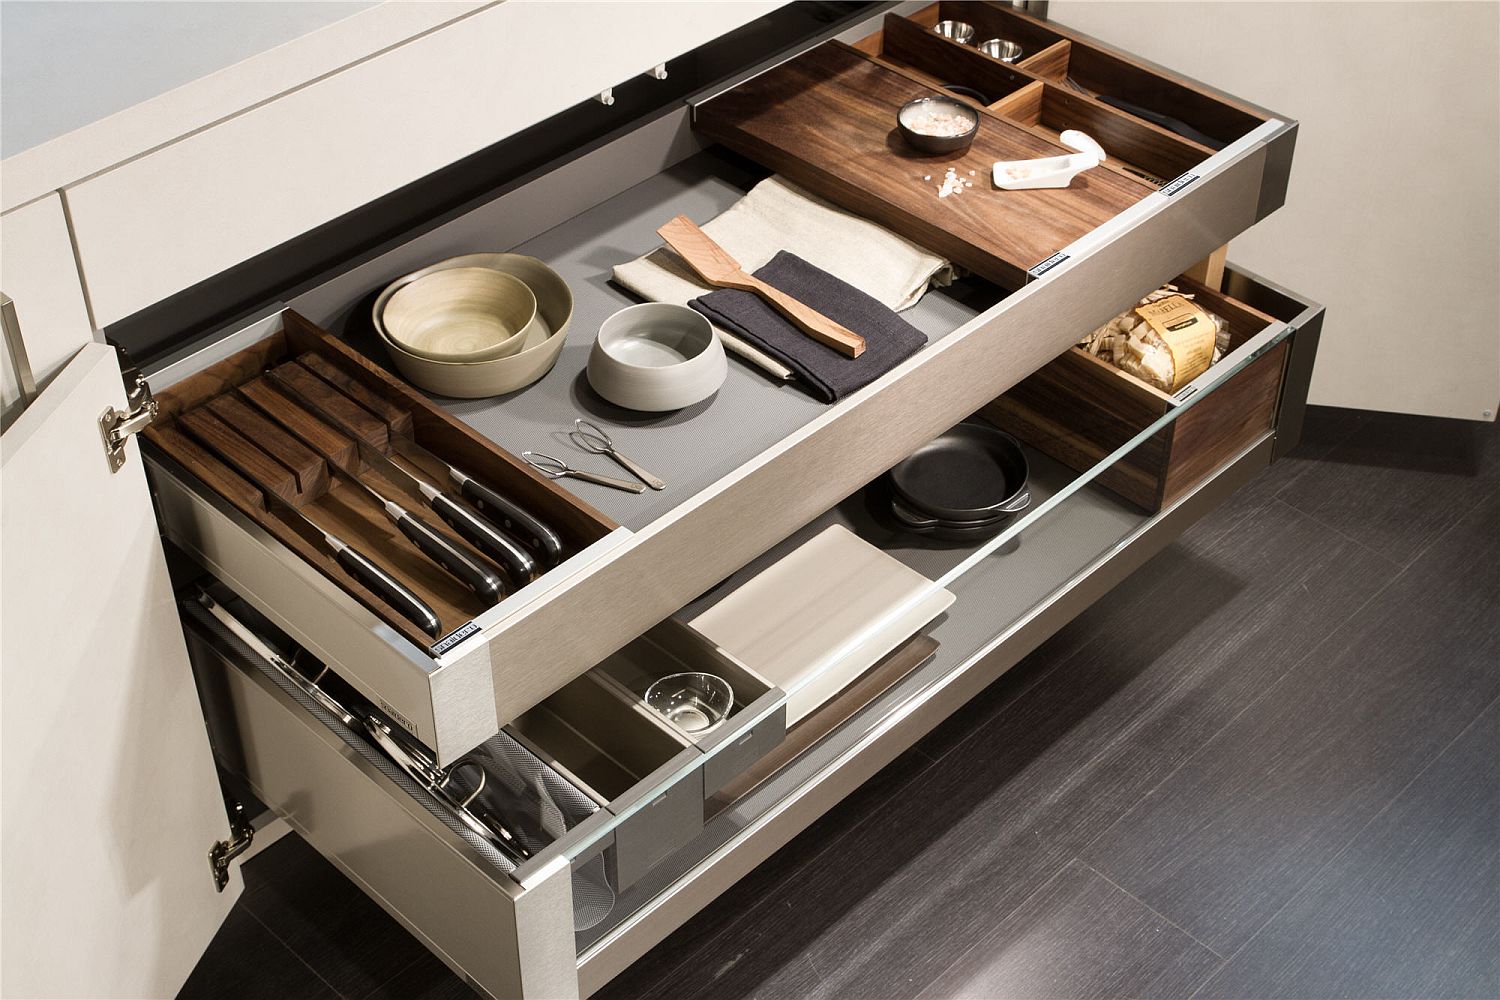 Sliding-drawers-in-the-kitchen-island-help-tuck-away-cutlery